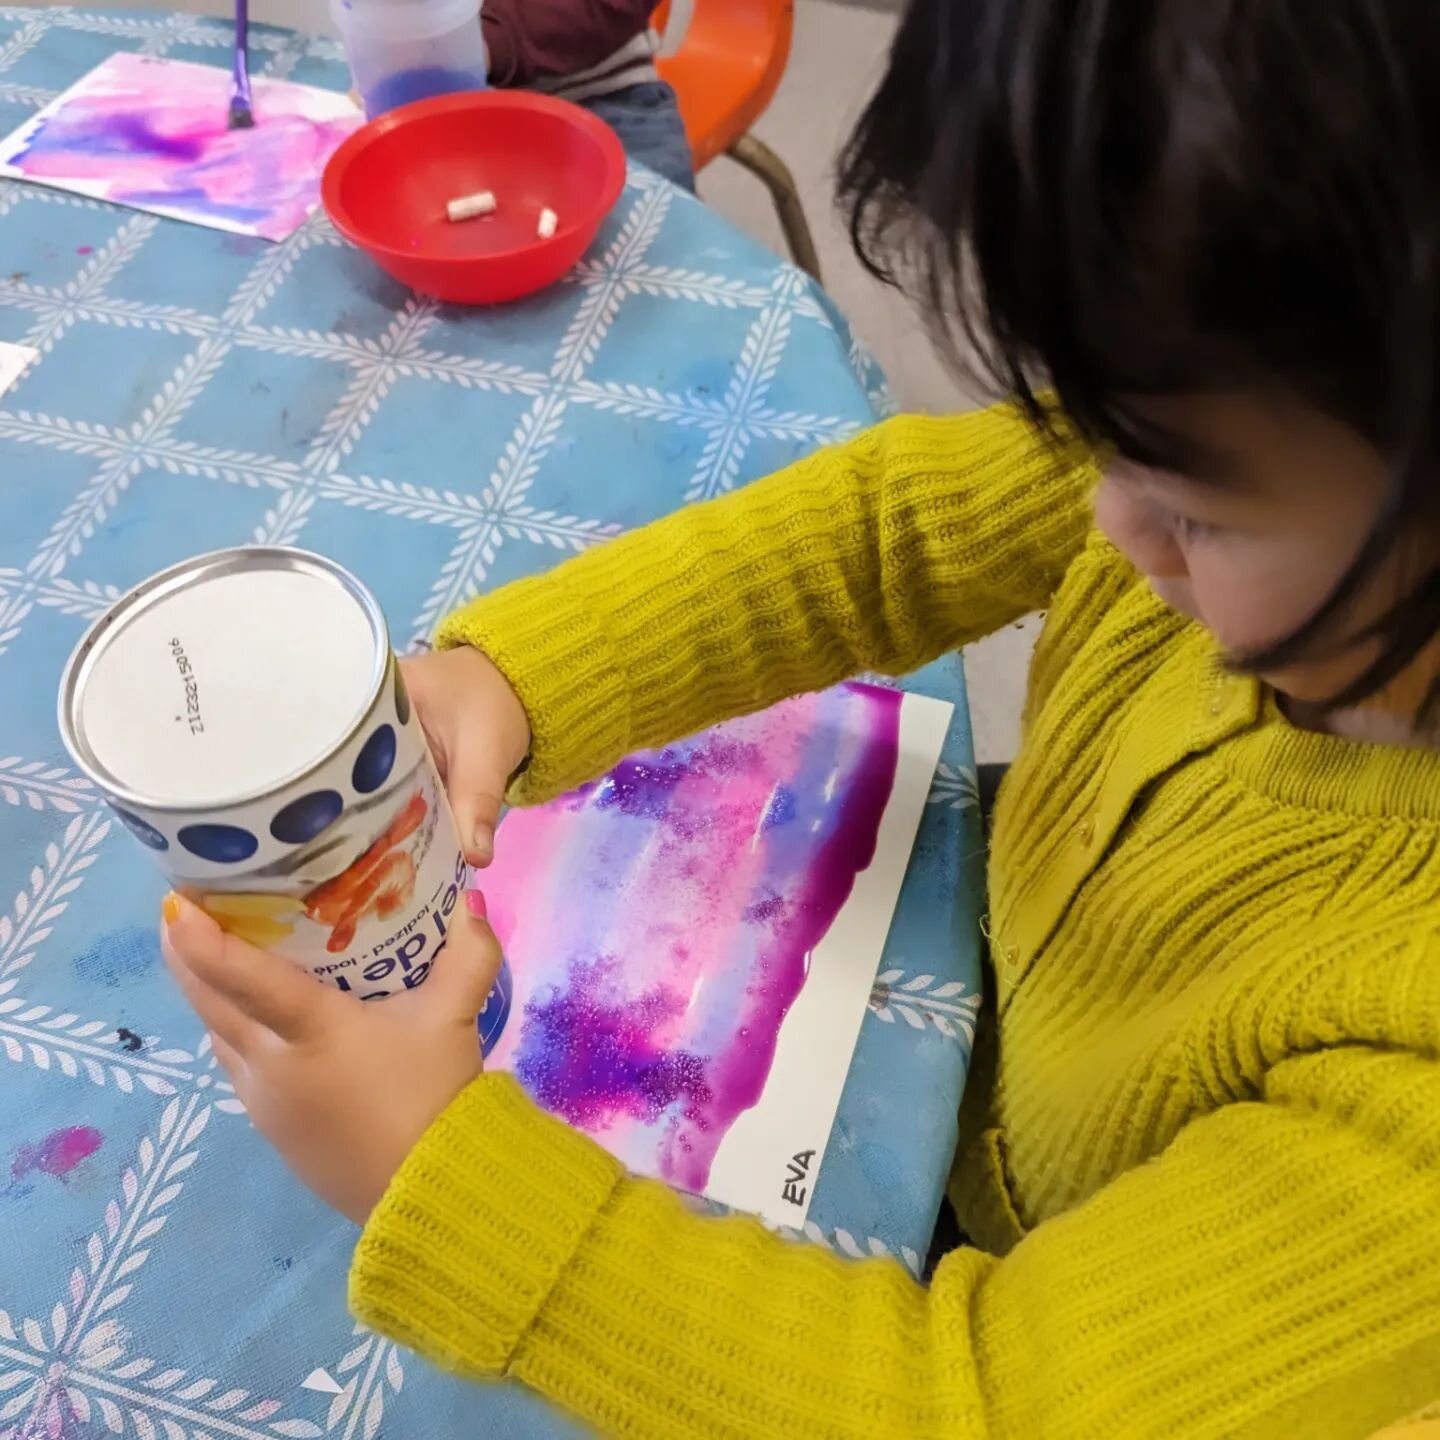 Today we experimented with some bright new liquid water colors, white pastels and salt to make these pretty Winter scenes 
#preschoolart